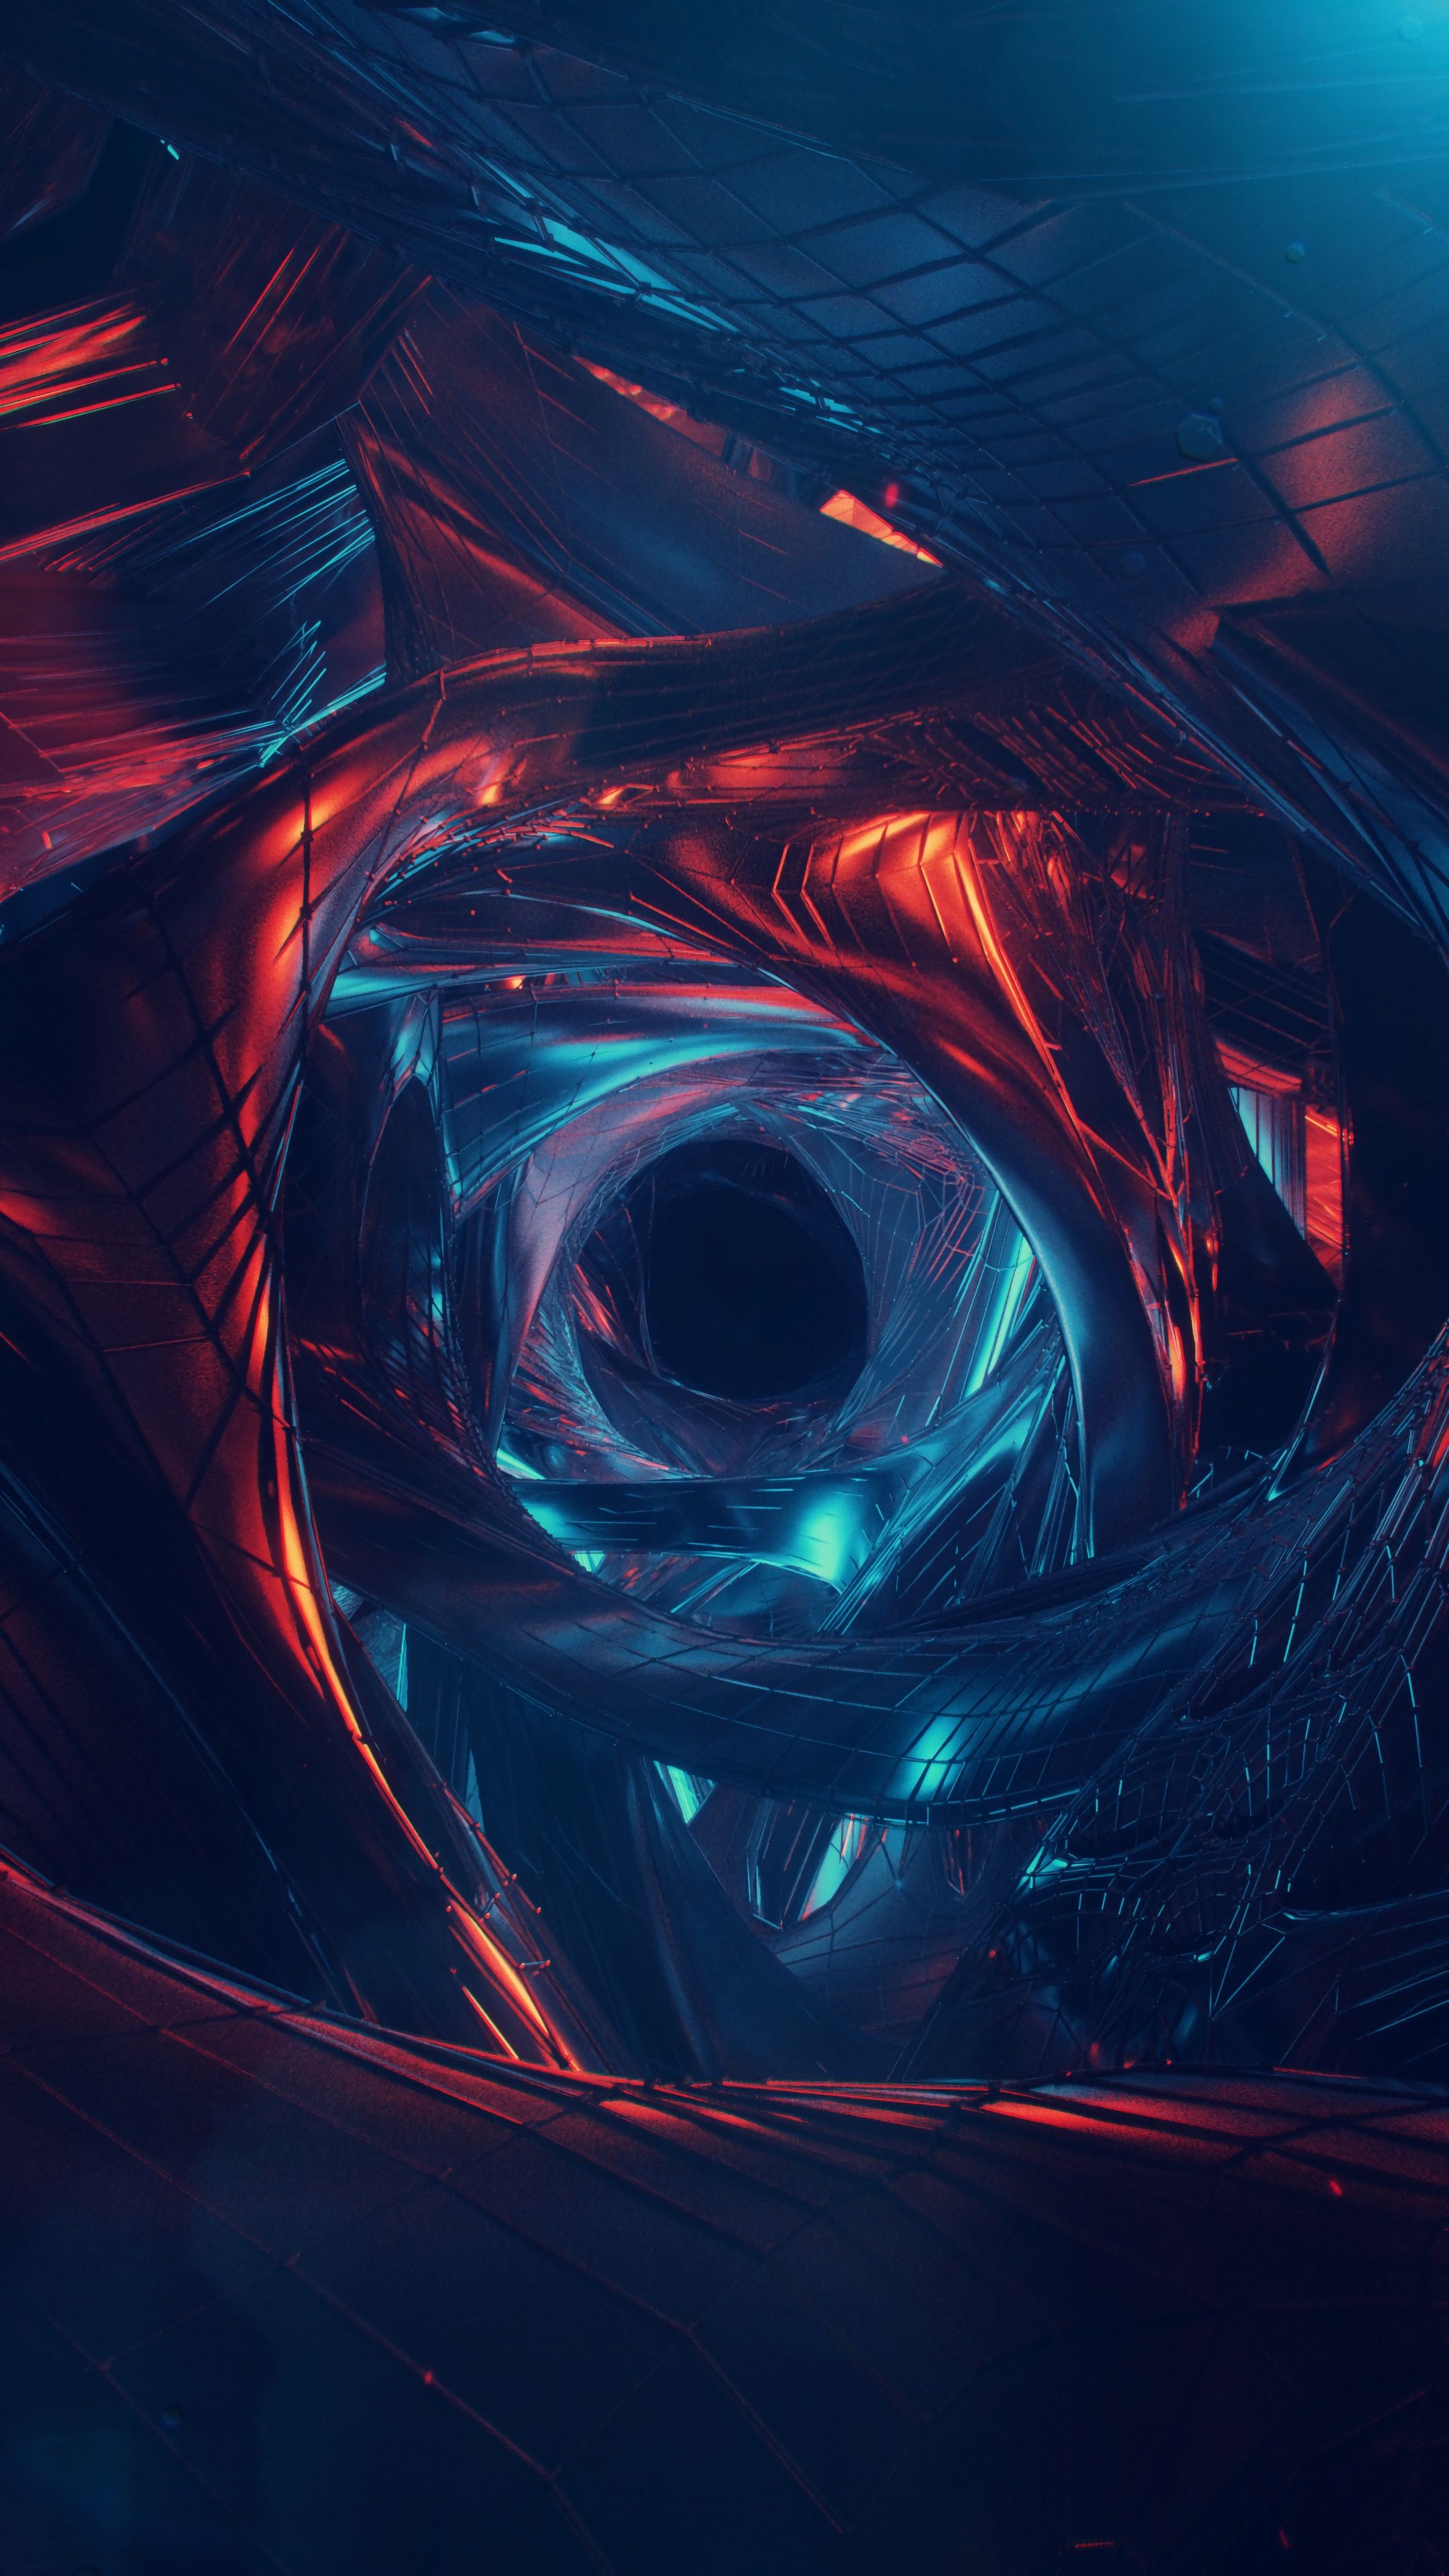 Abstract wormhole art visualization wallpapers hd 4k